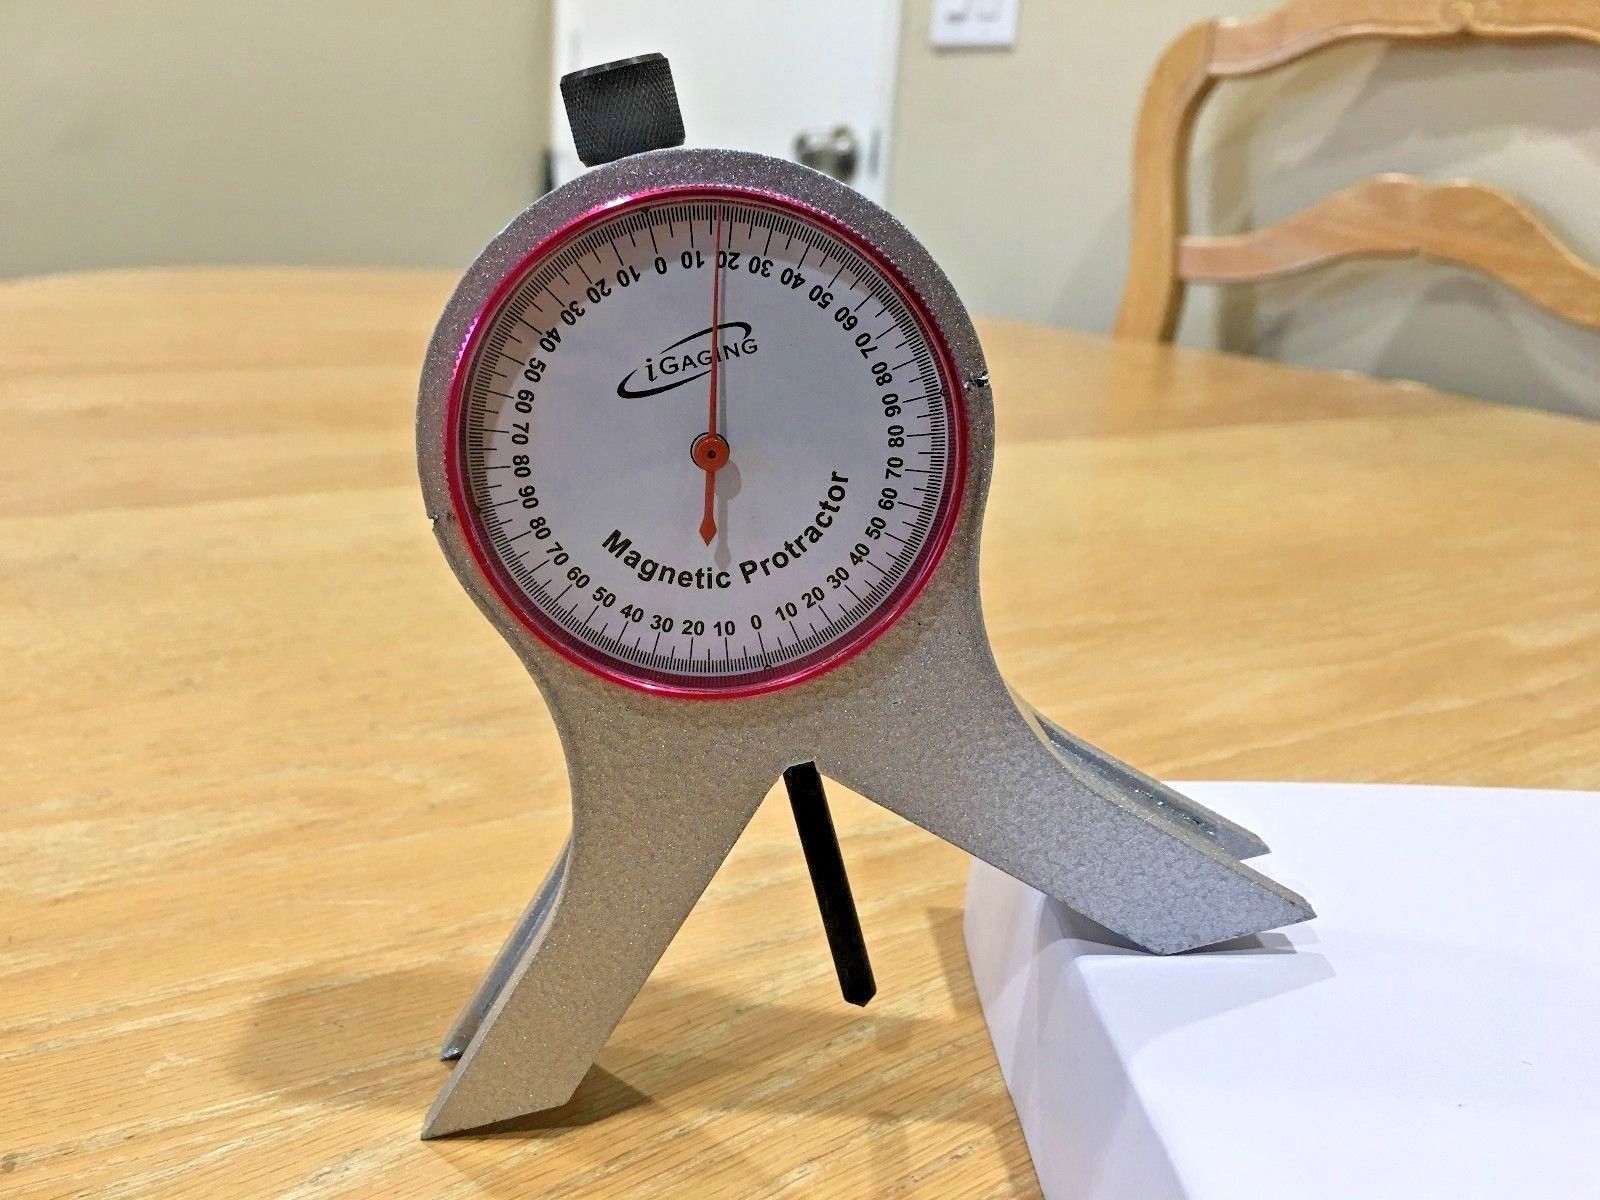 iGAGING Magnetic Dial Protractor with Punch